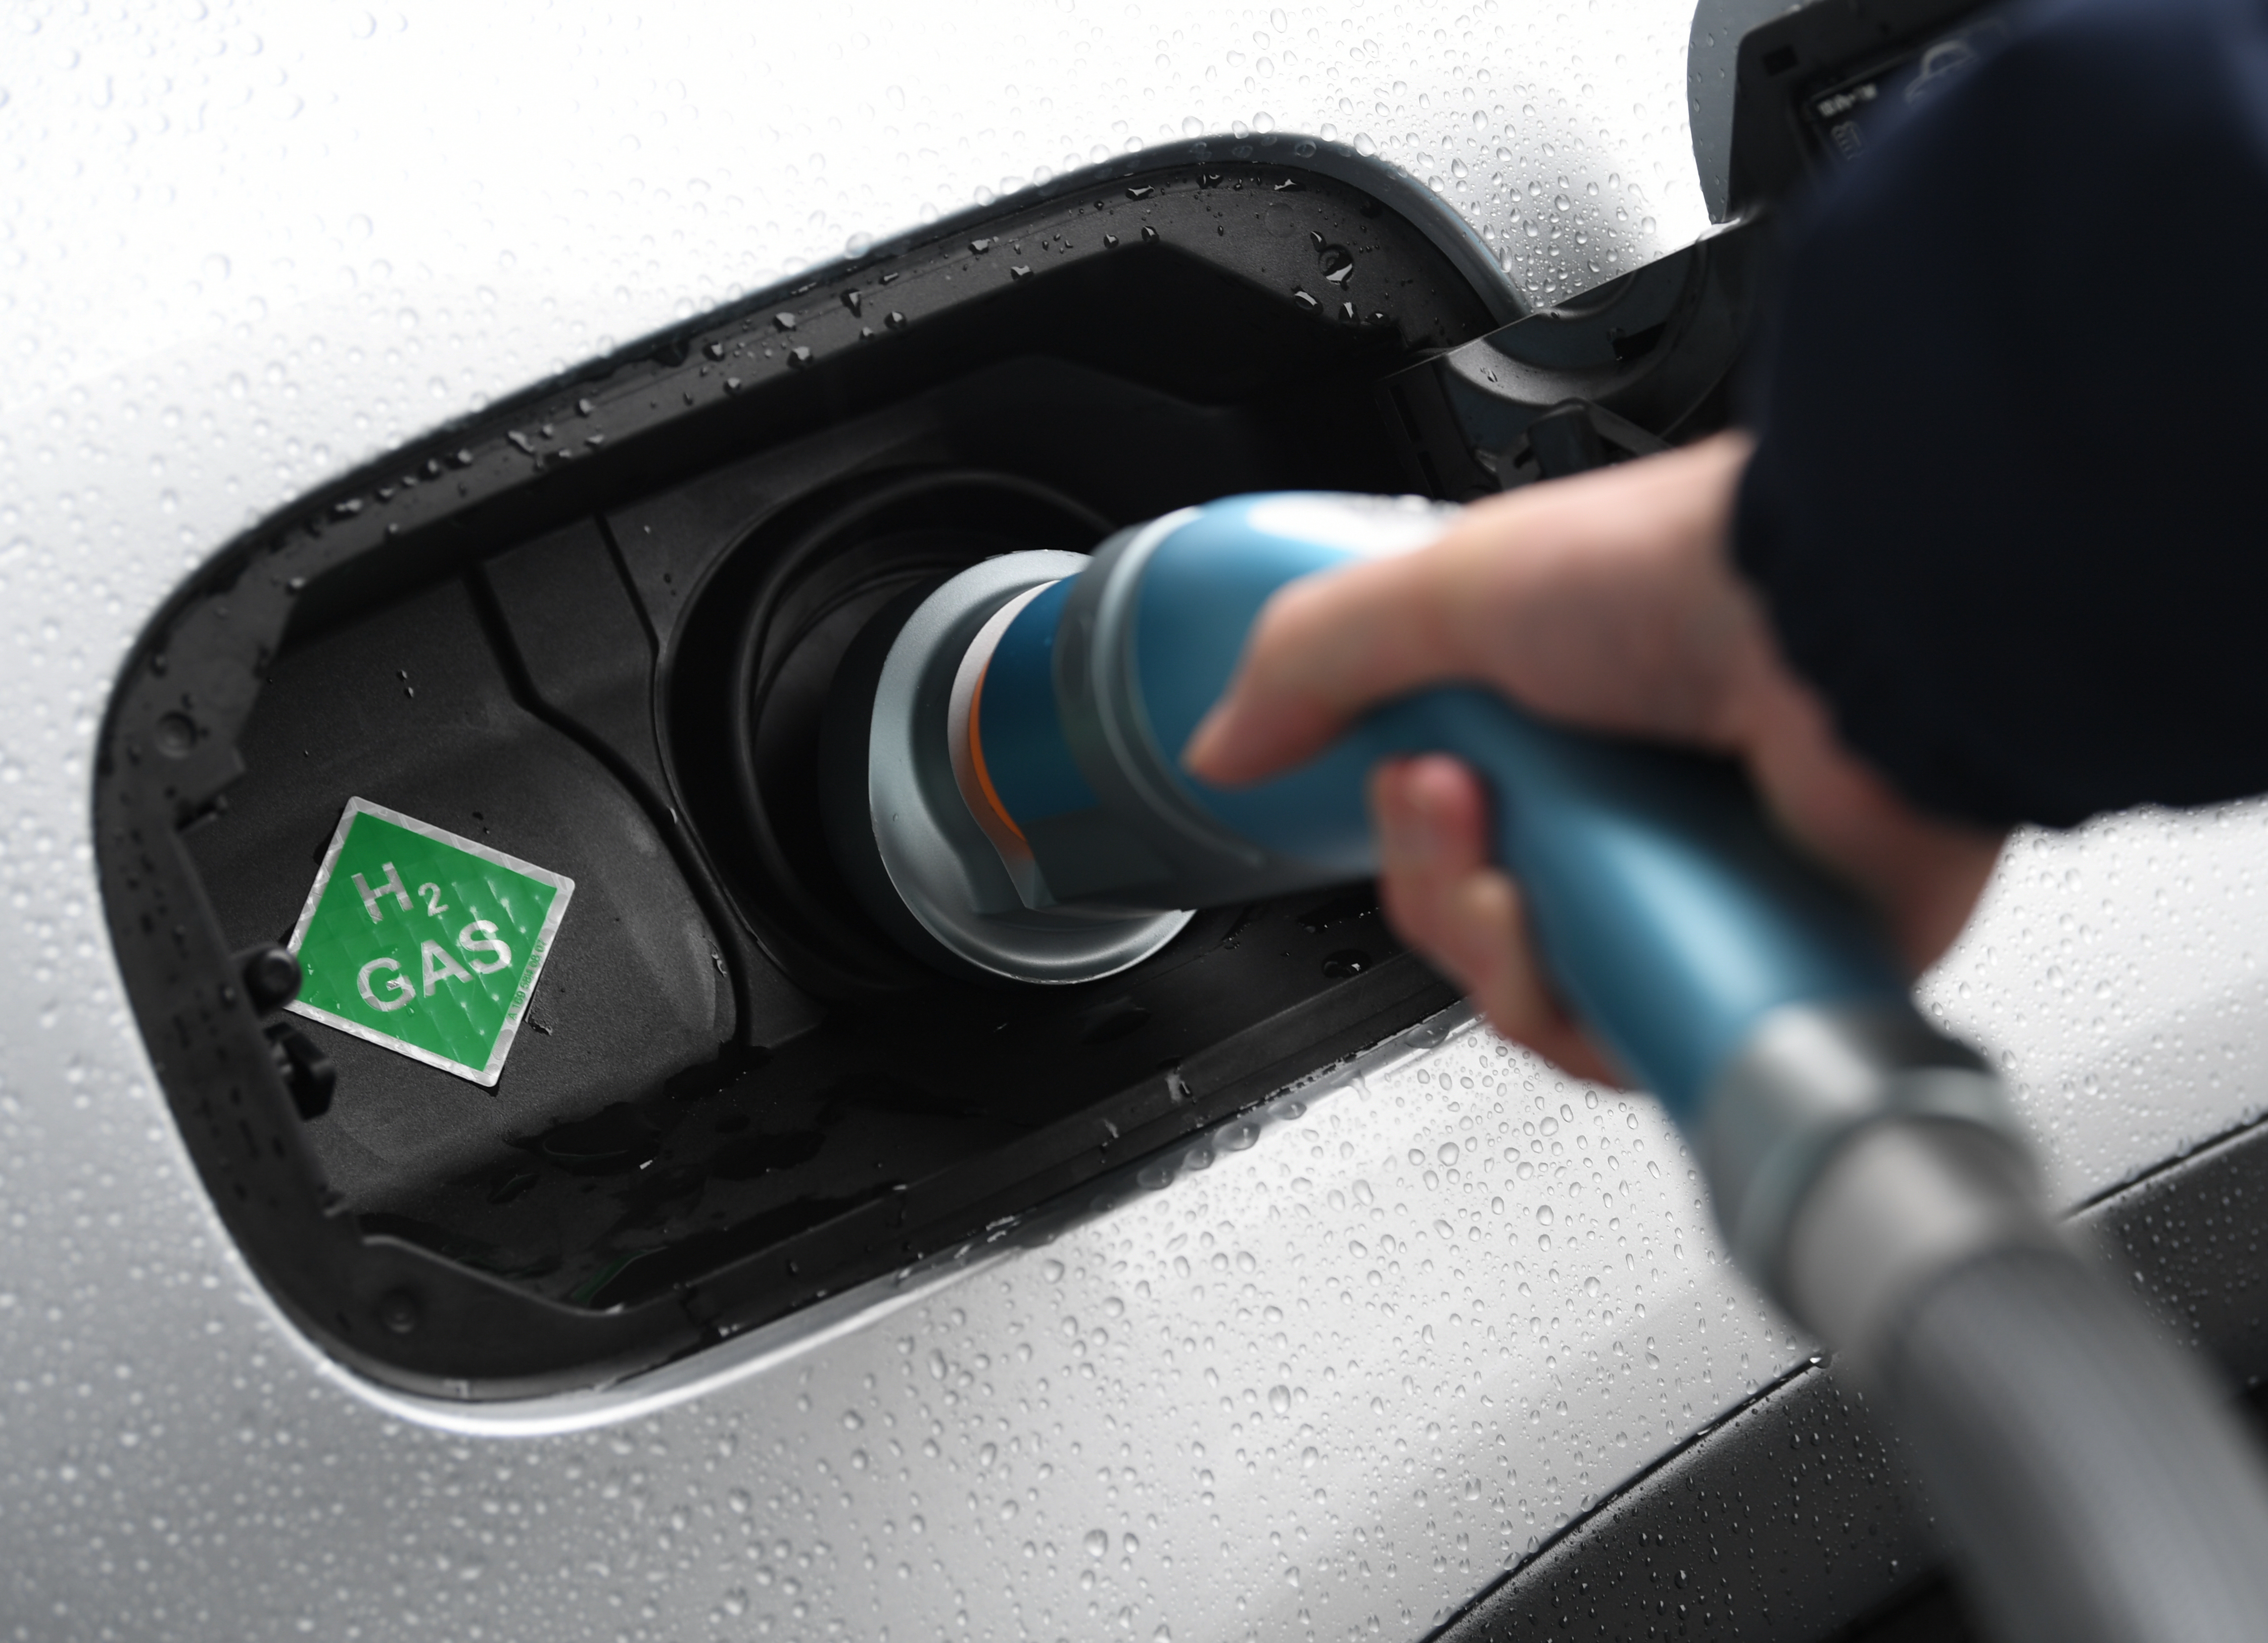 ‘Hydrogen could represent one fifth of total energy in 2050’